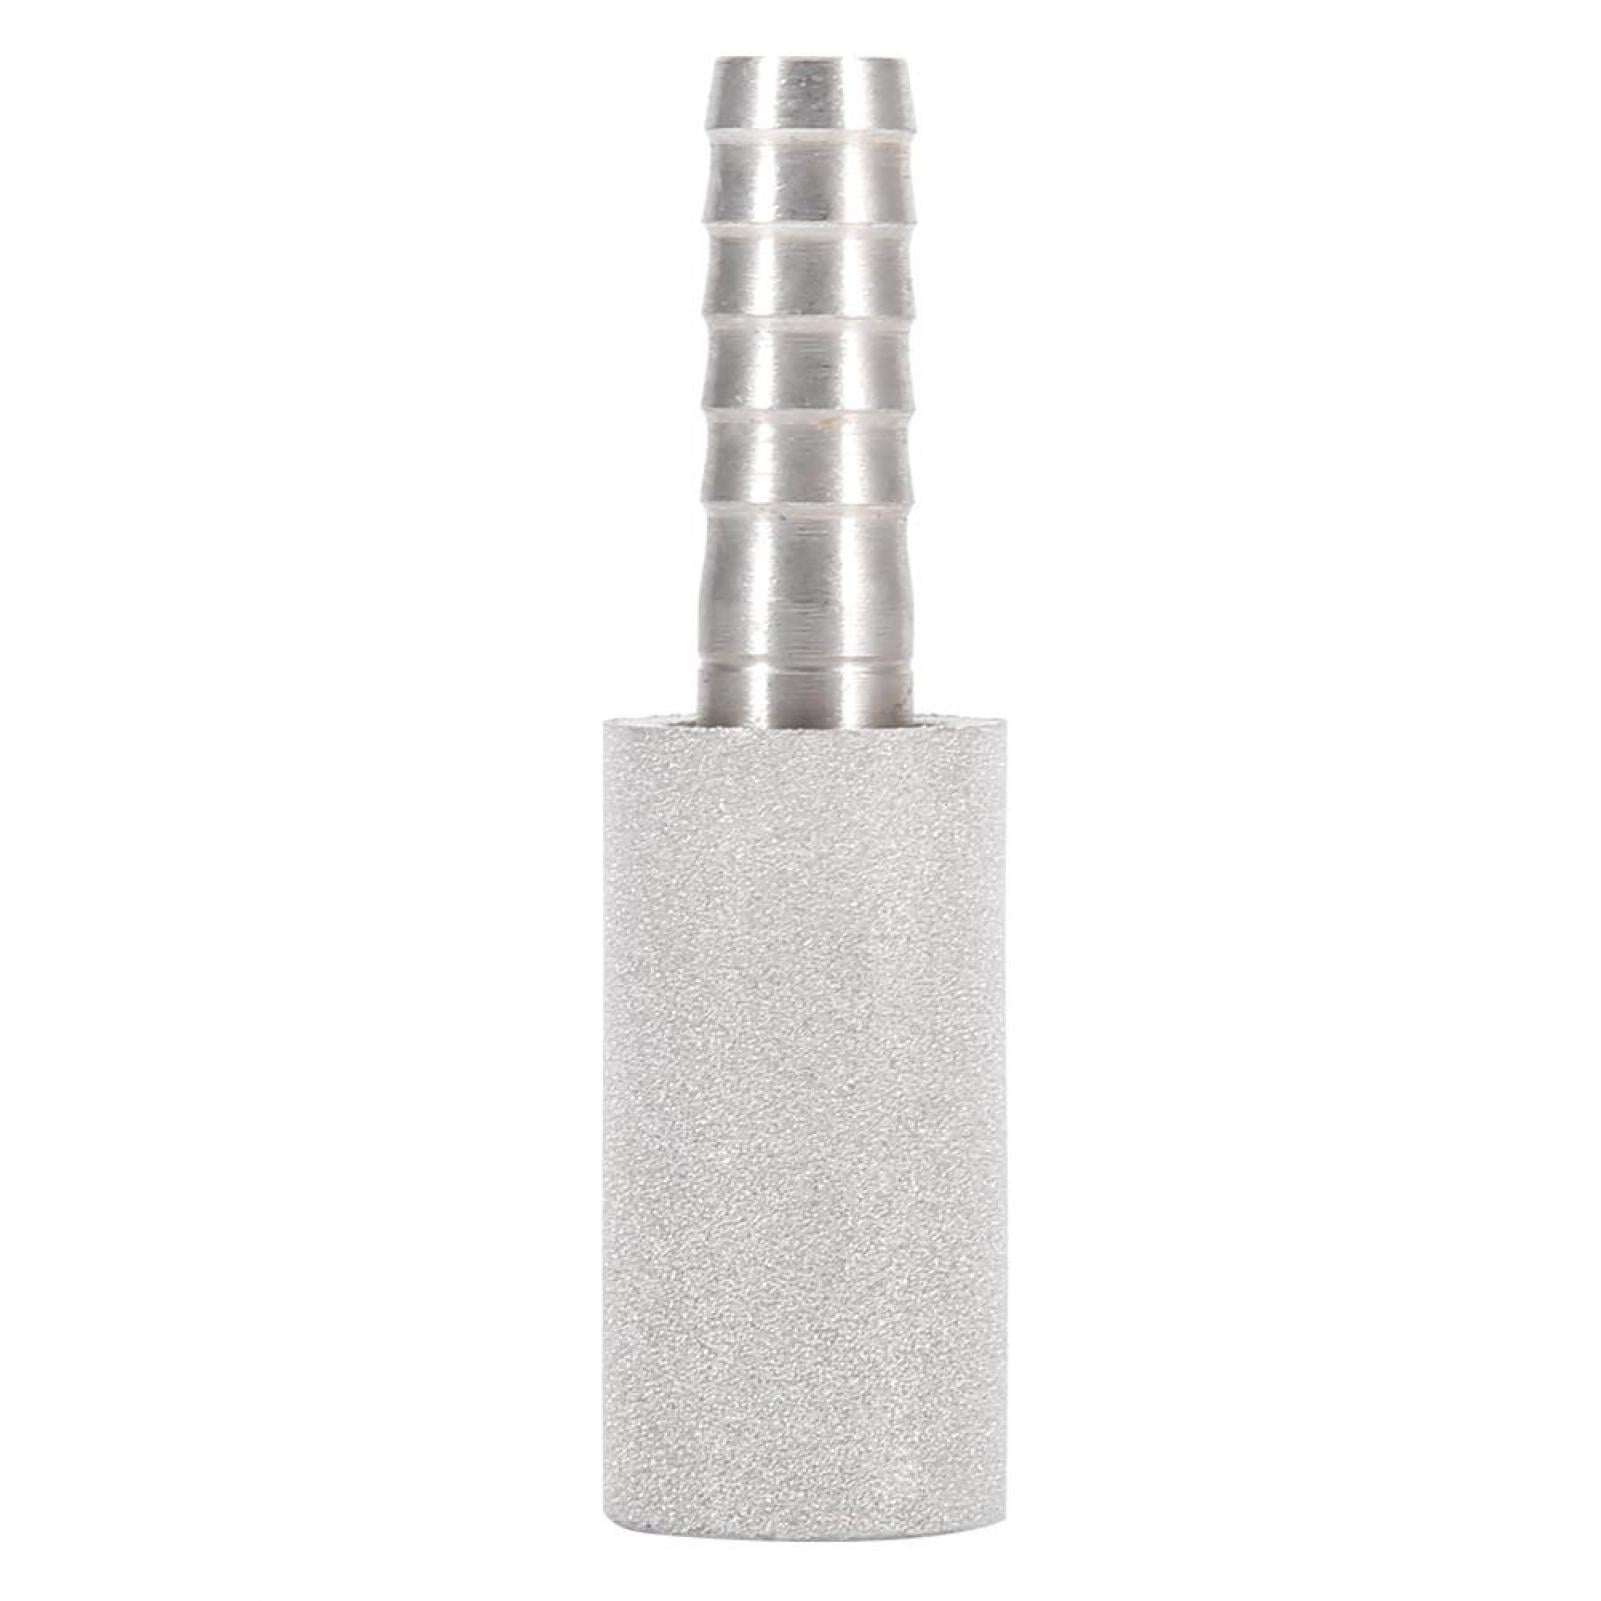 Diffusion Stone Stainless Steel Aeration Carbonating Stone Beer Wine Accessories for Home Brew,Bar 0.5Micron 